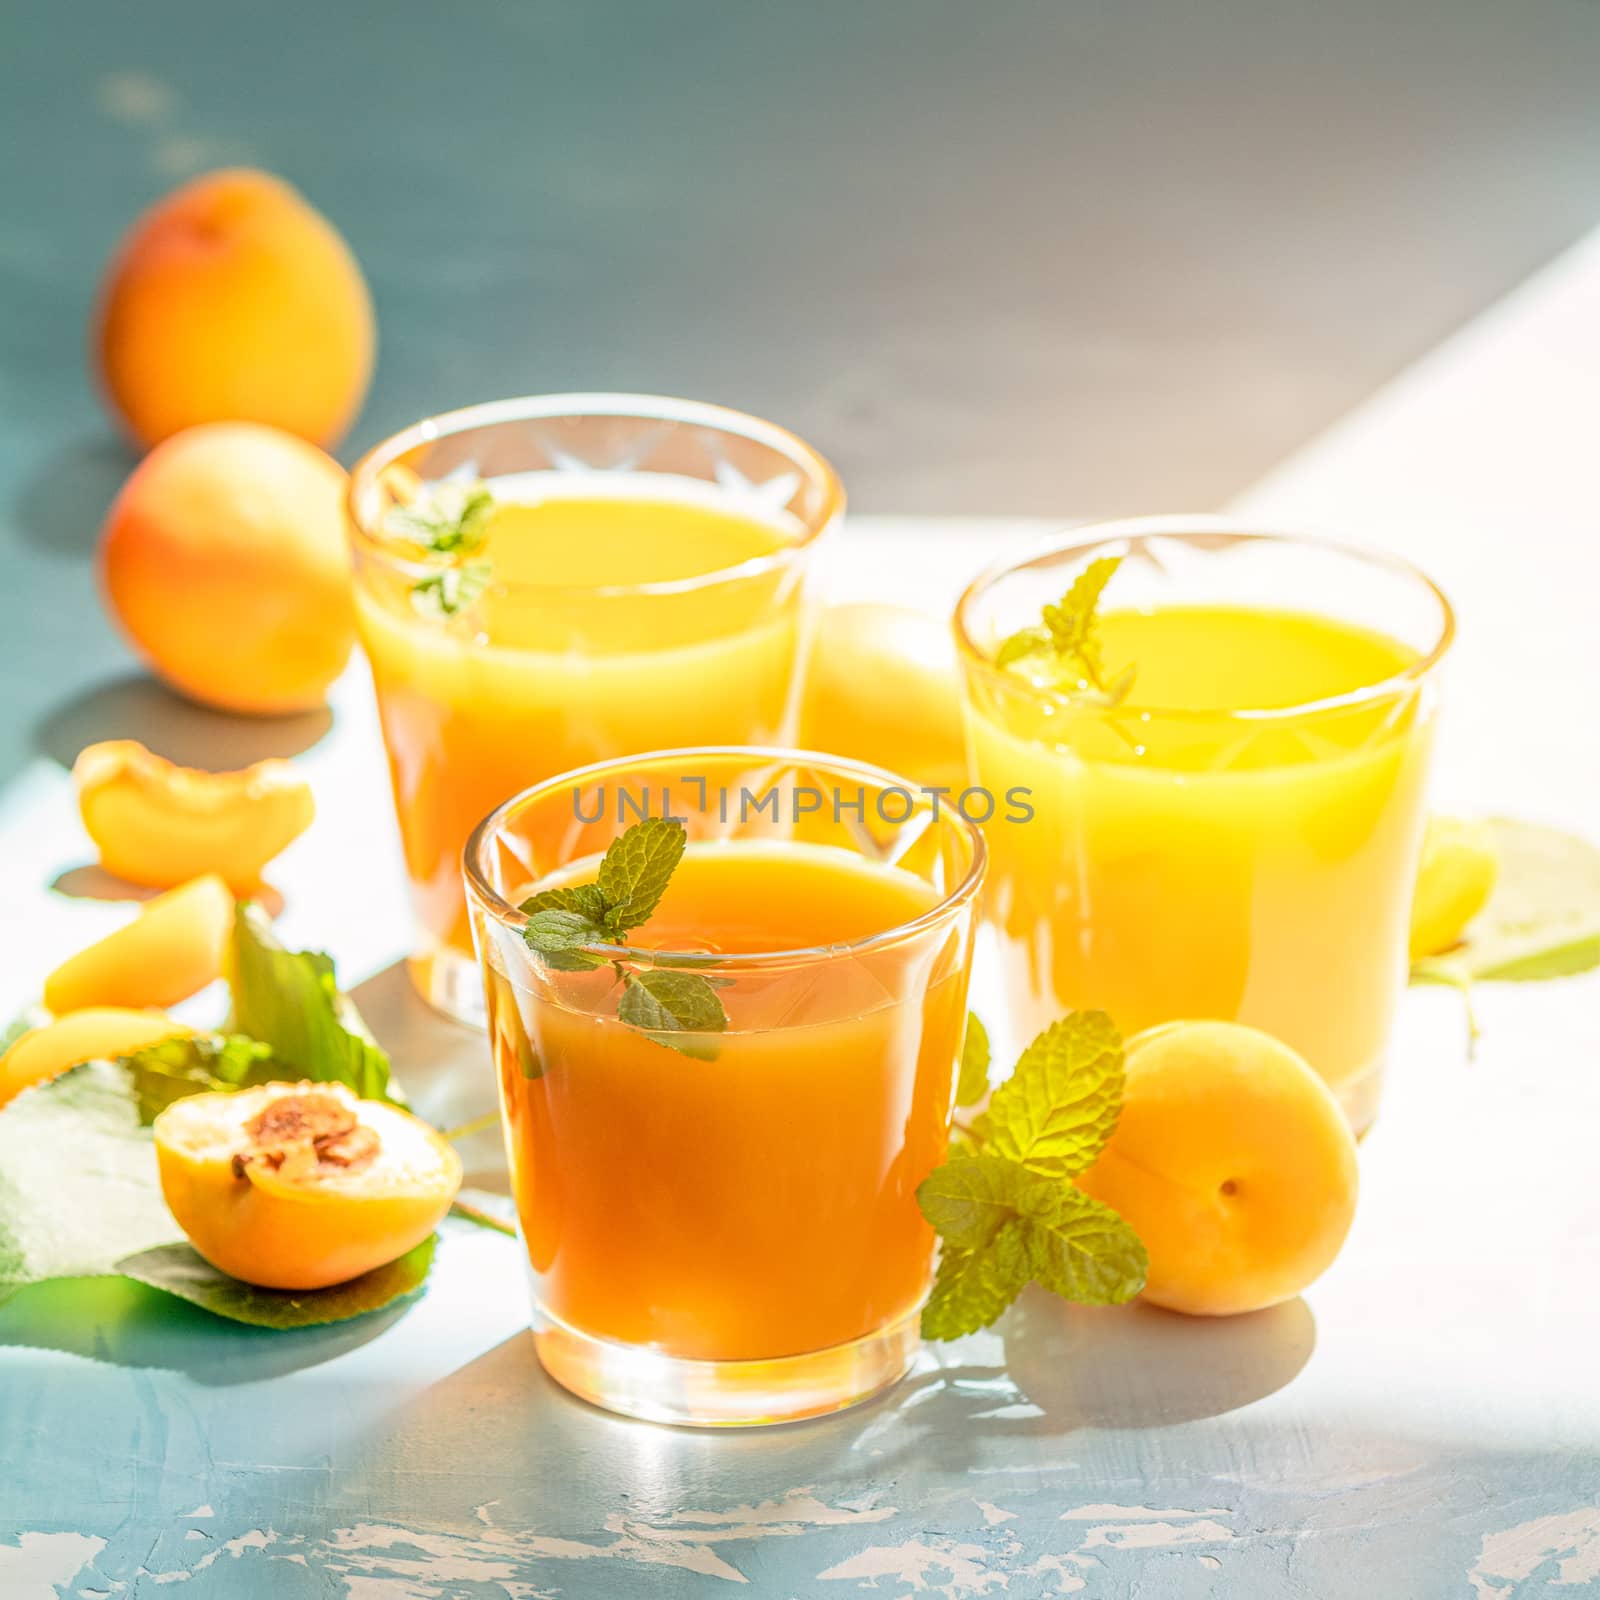 Glass of fresh healthy apricot juice in sunny light by ArtSvitlyna